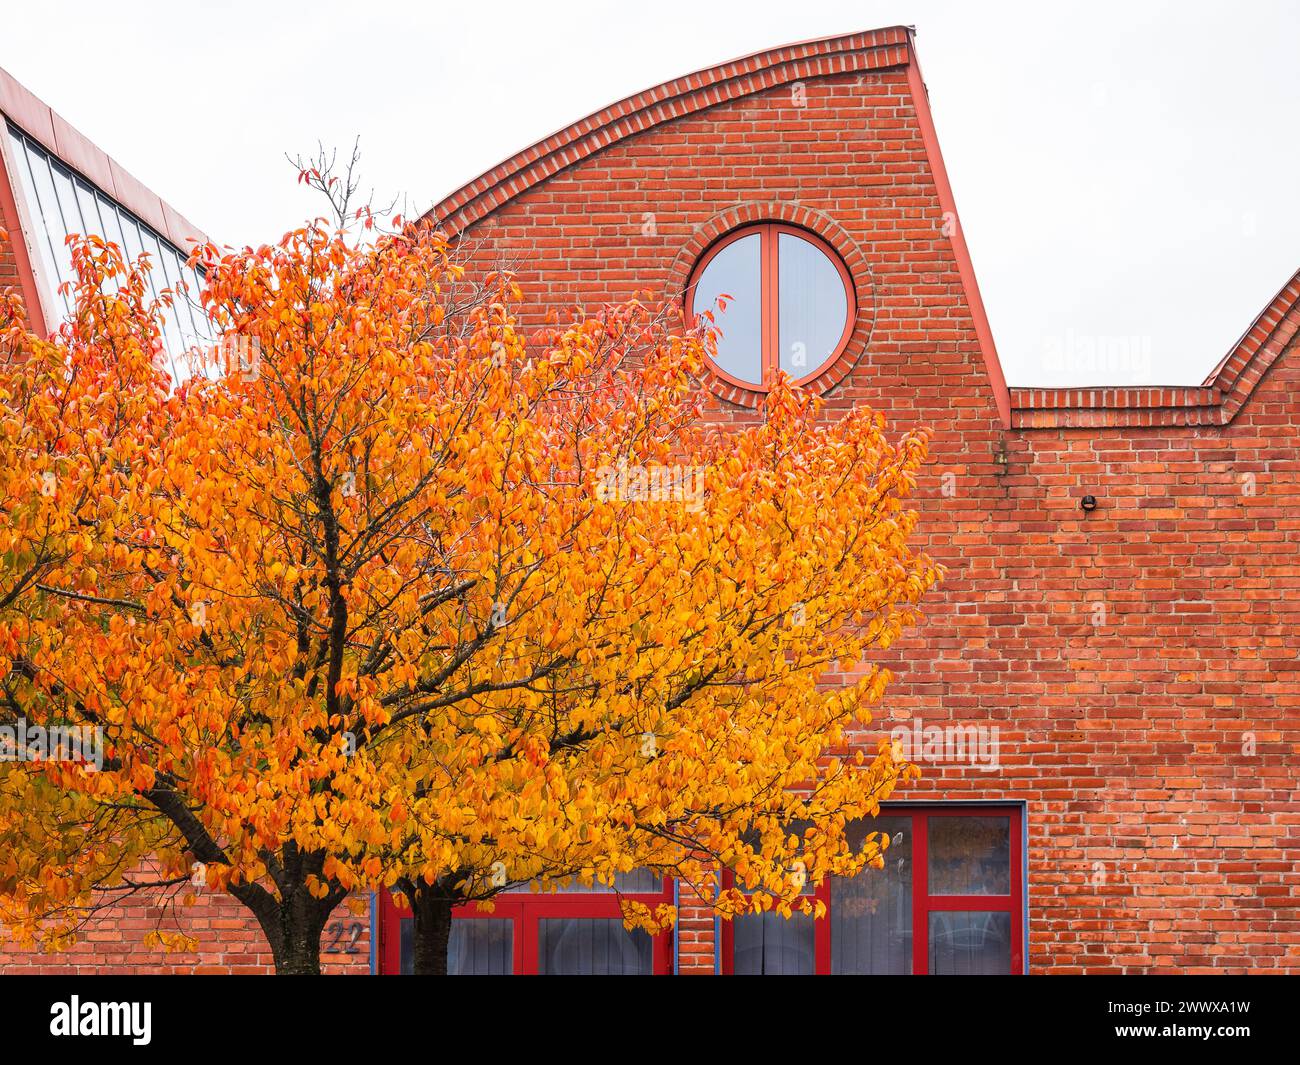 A red brick building with a tree in front of it, located in Gothenburg, Sweden. The tree is in full autumn color, standing tall against the backdrop o Stock Photo